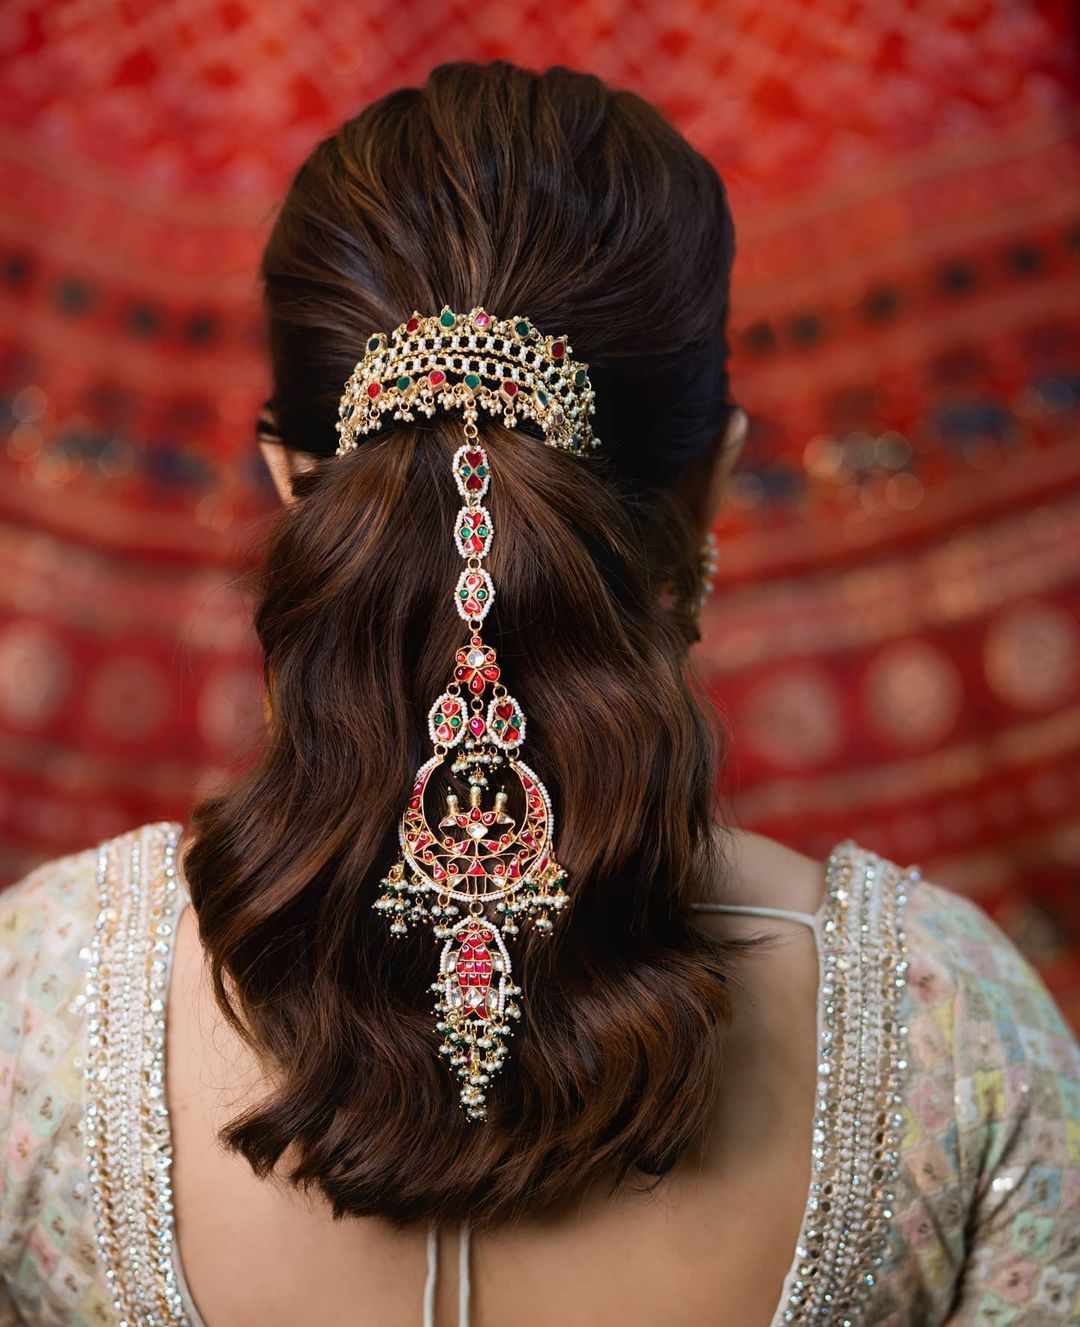 Trending Bridal Hairstyles that every to-be bride must check out!